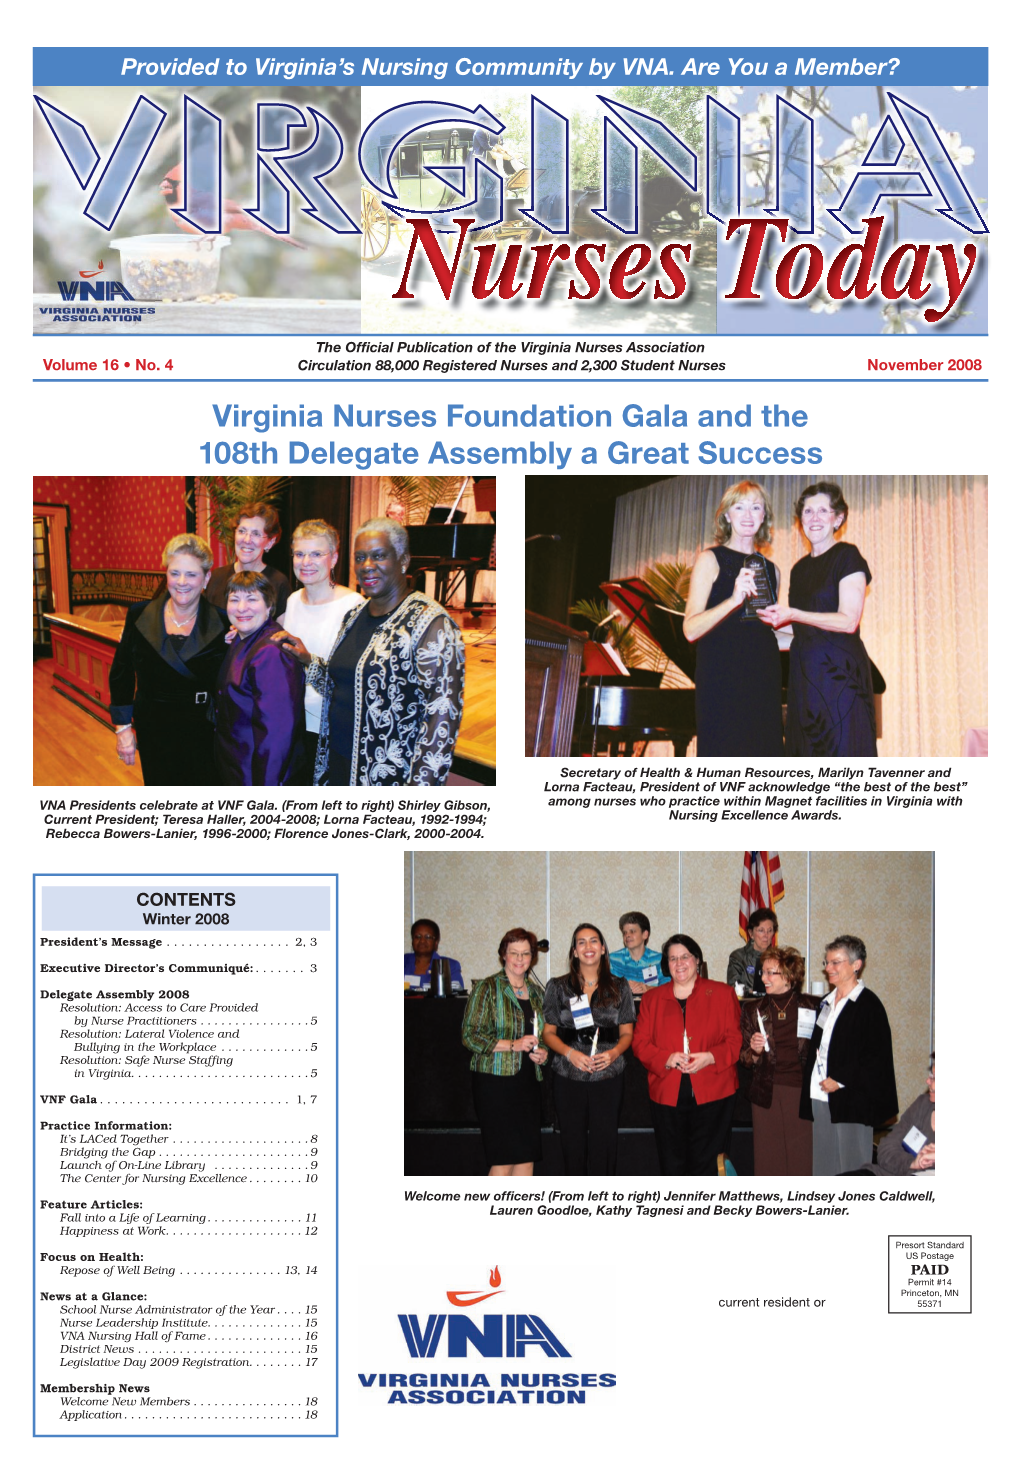 Virginia Nurses Foundation Gala and the 108Th Delegate Assembly a Great Success